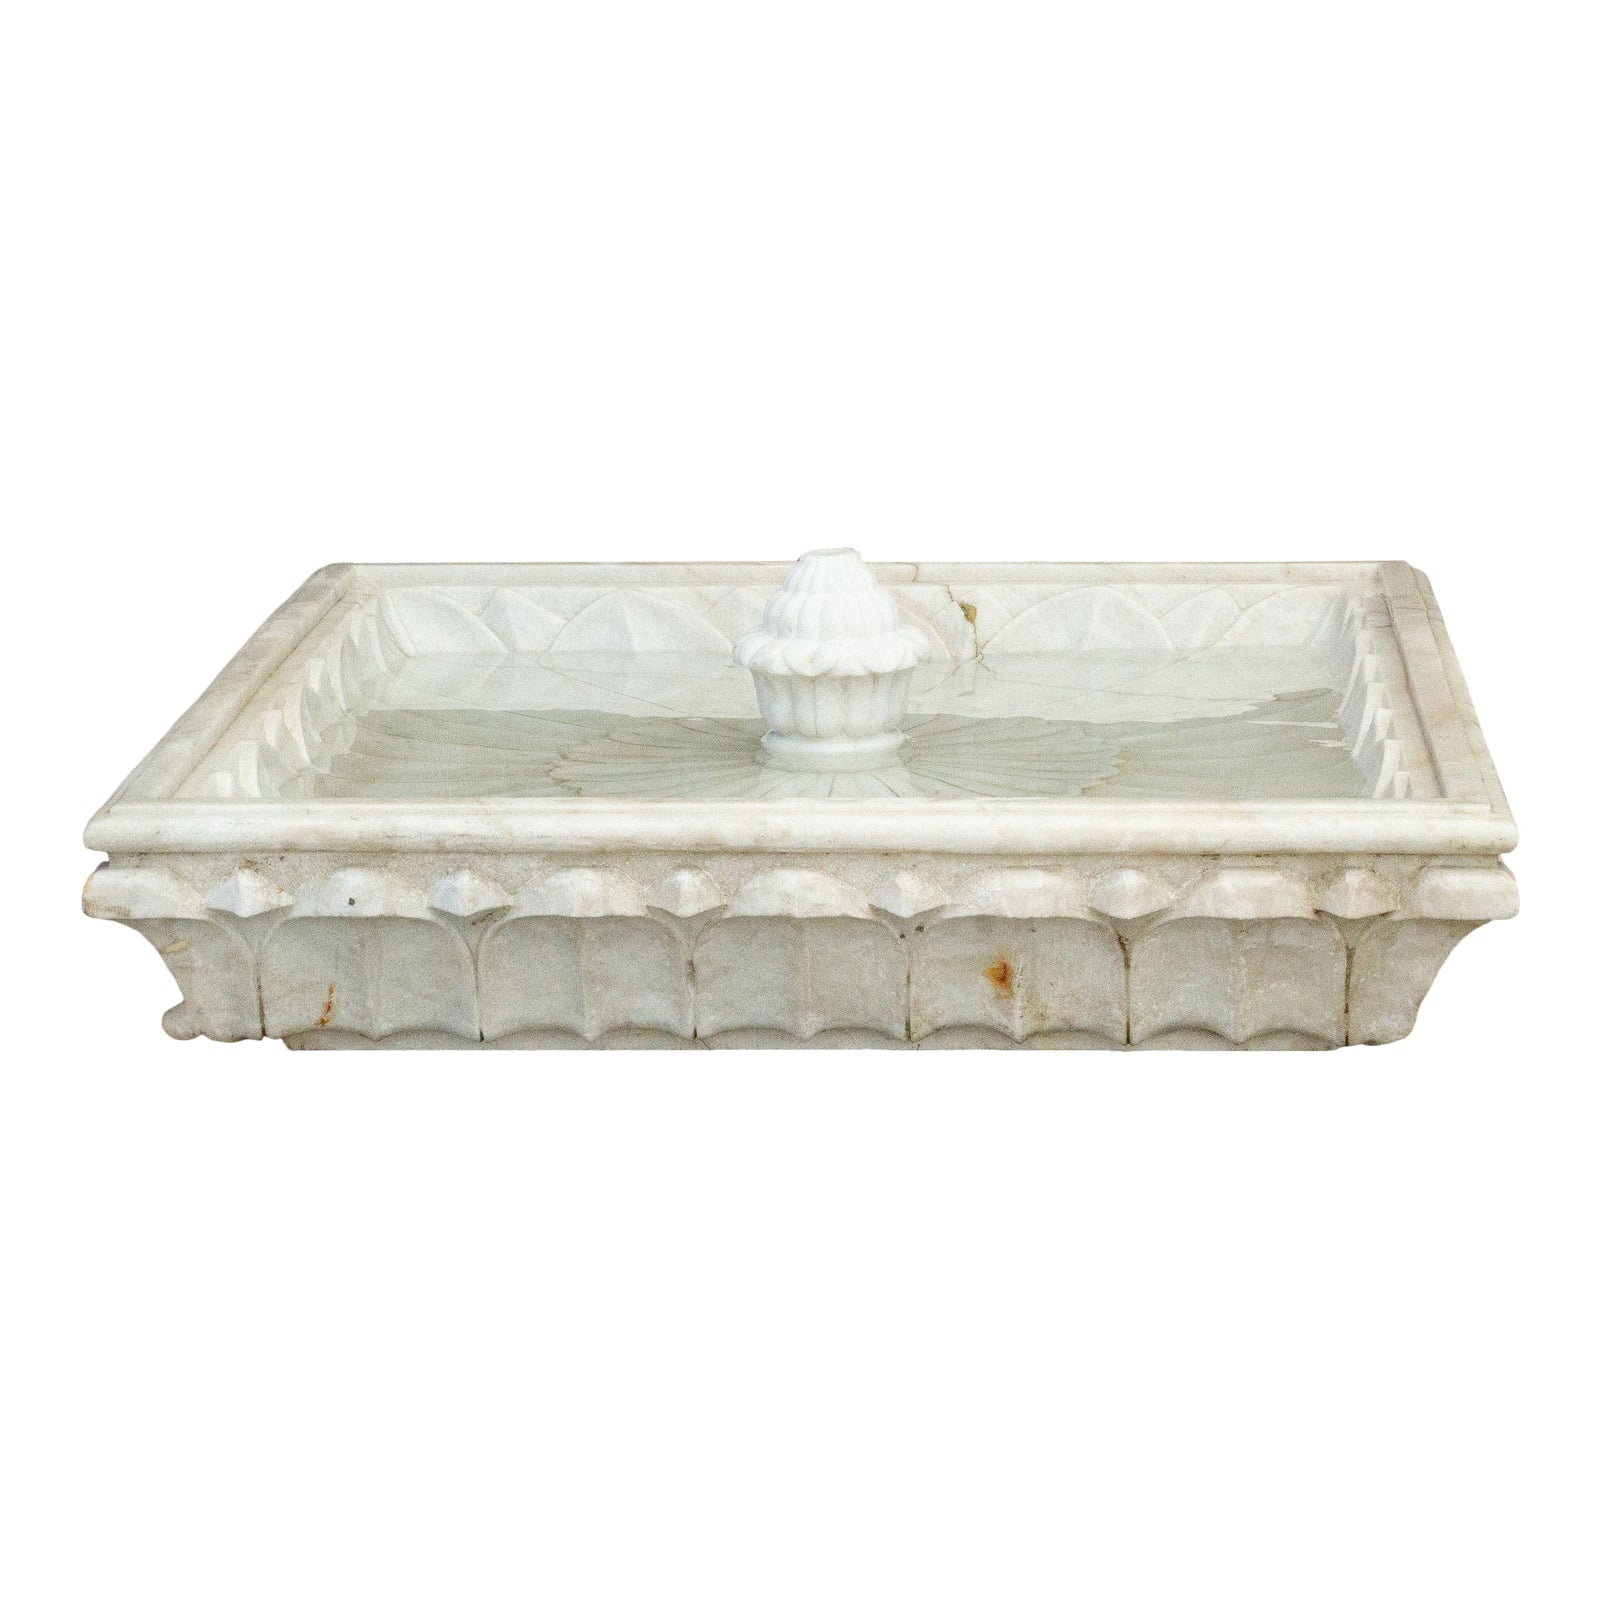 Early 20th C. Marble Fountain~P77598846